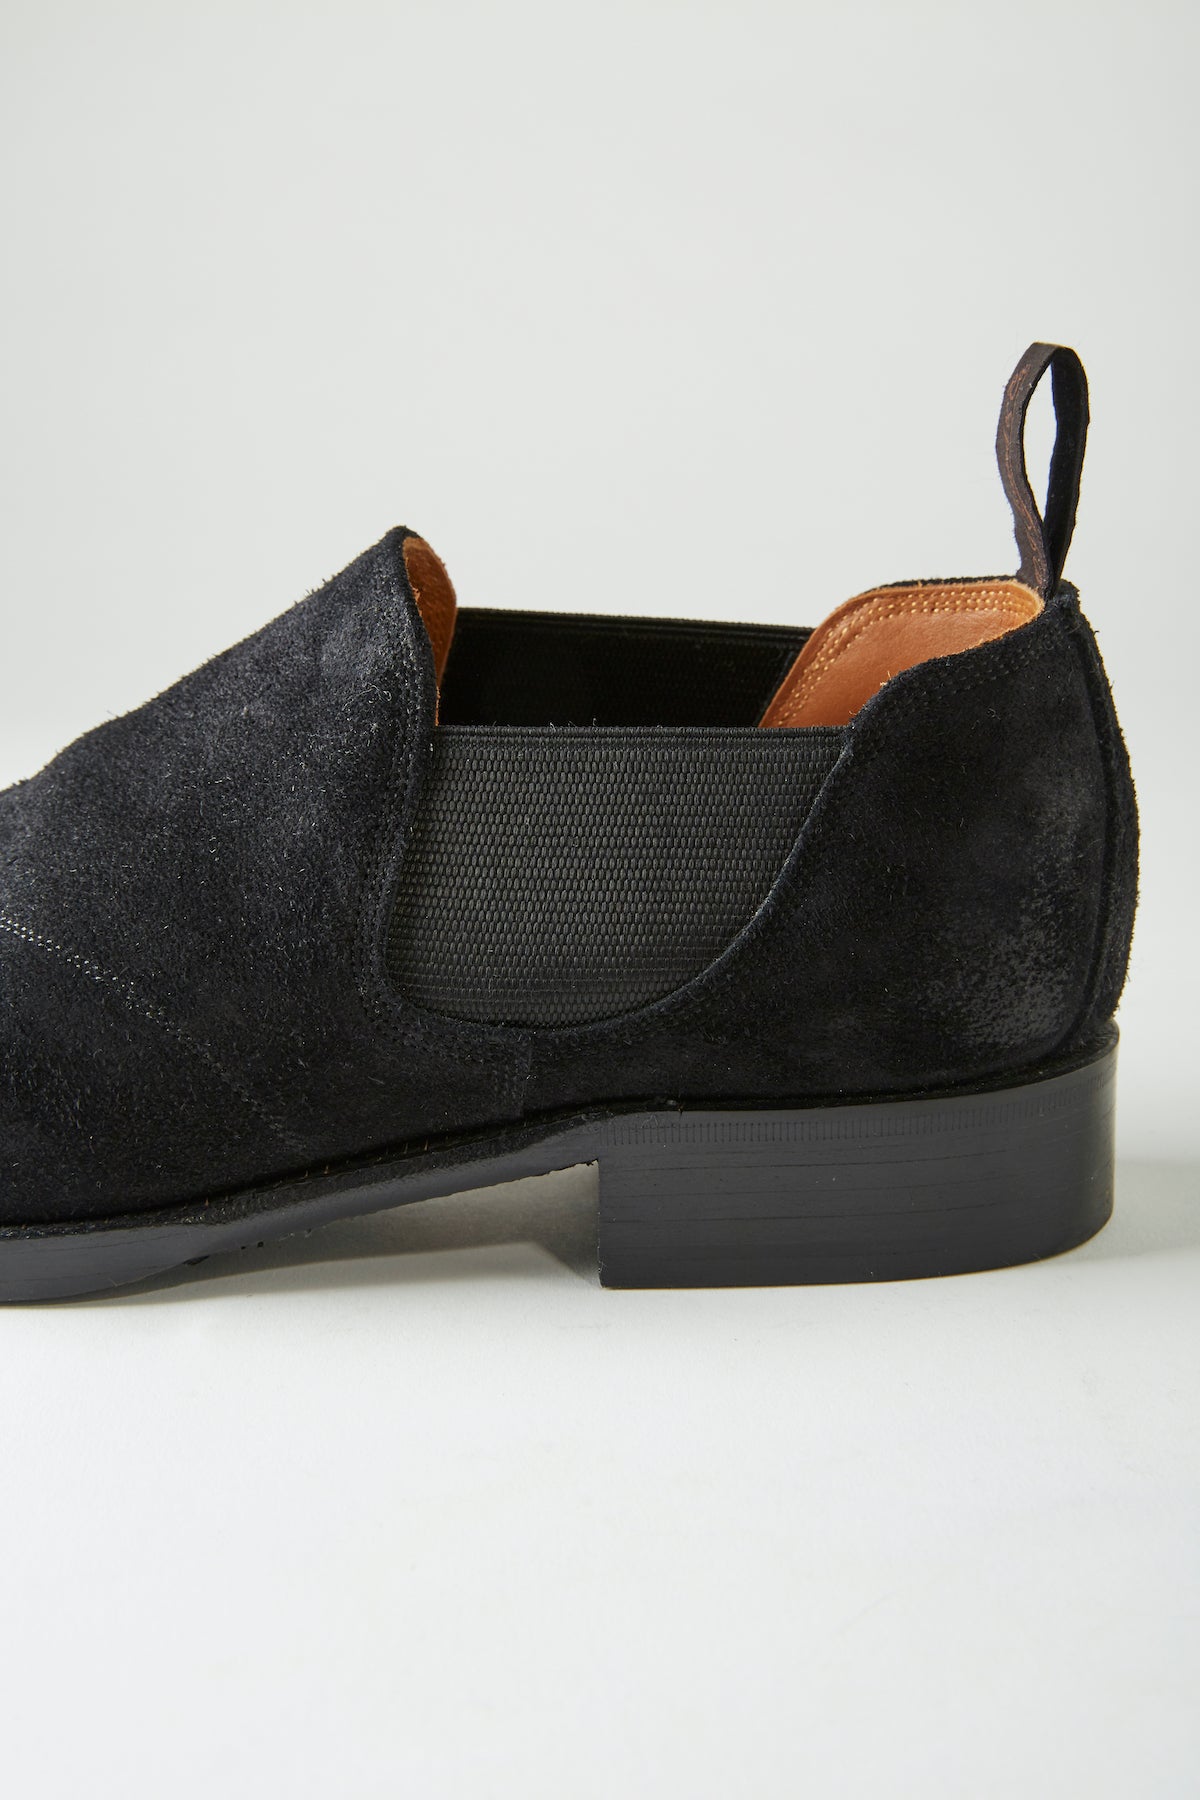 "The Gardner" STUNNING LEATHER SIDE-GORE SHOES - 222OJ-FW03